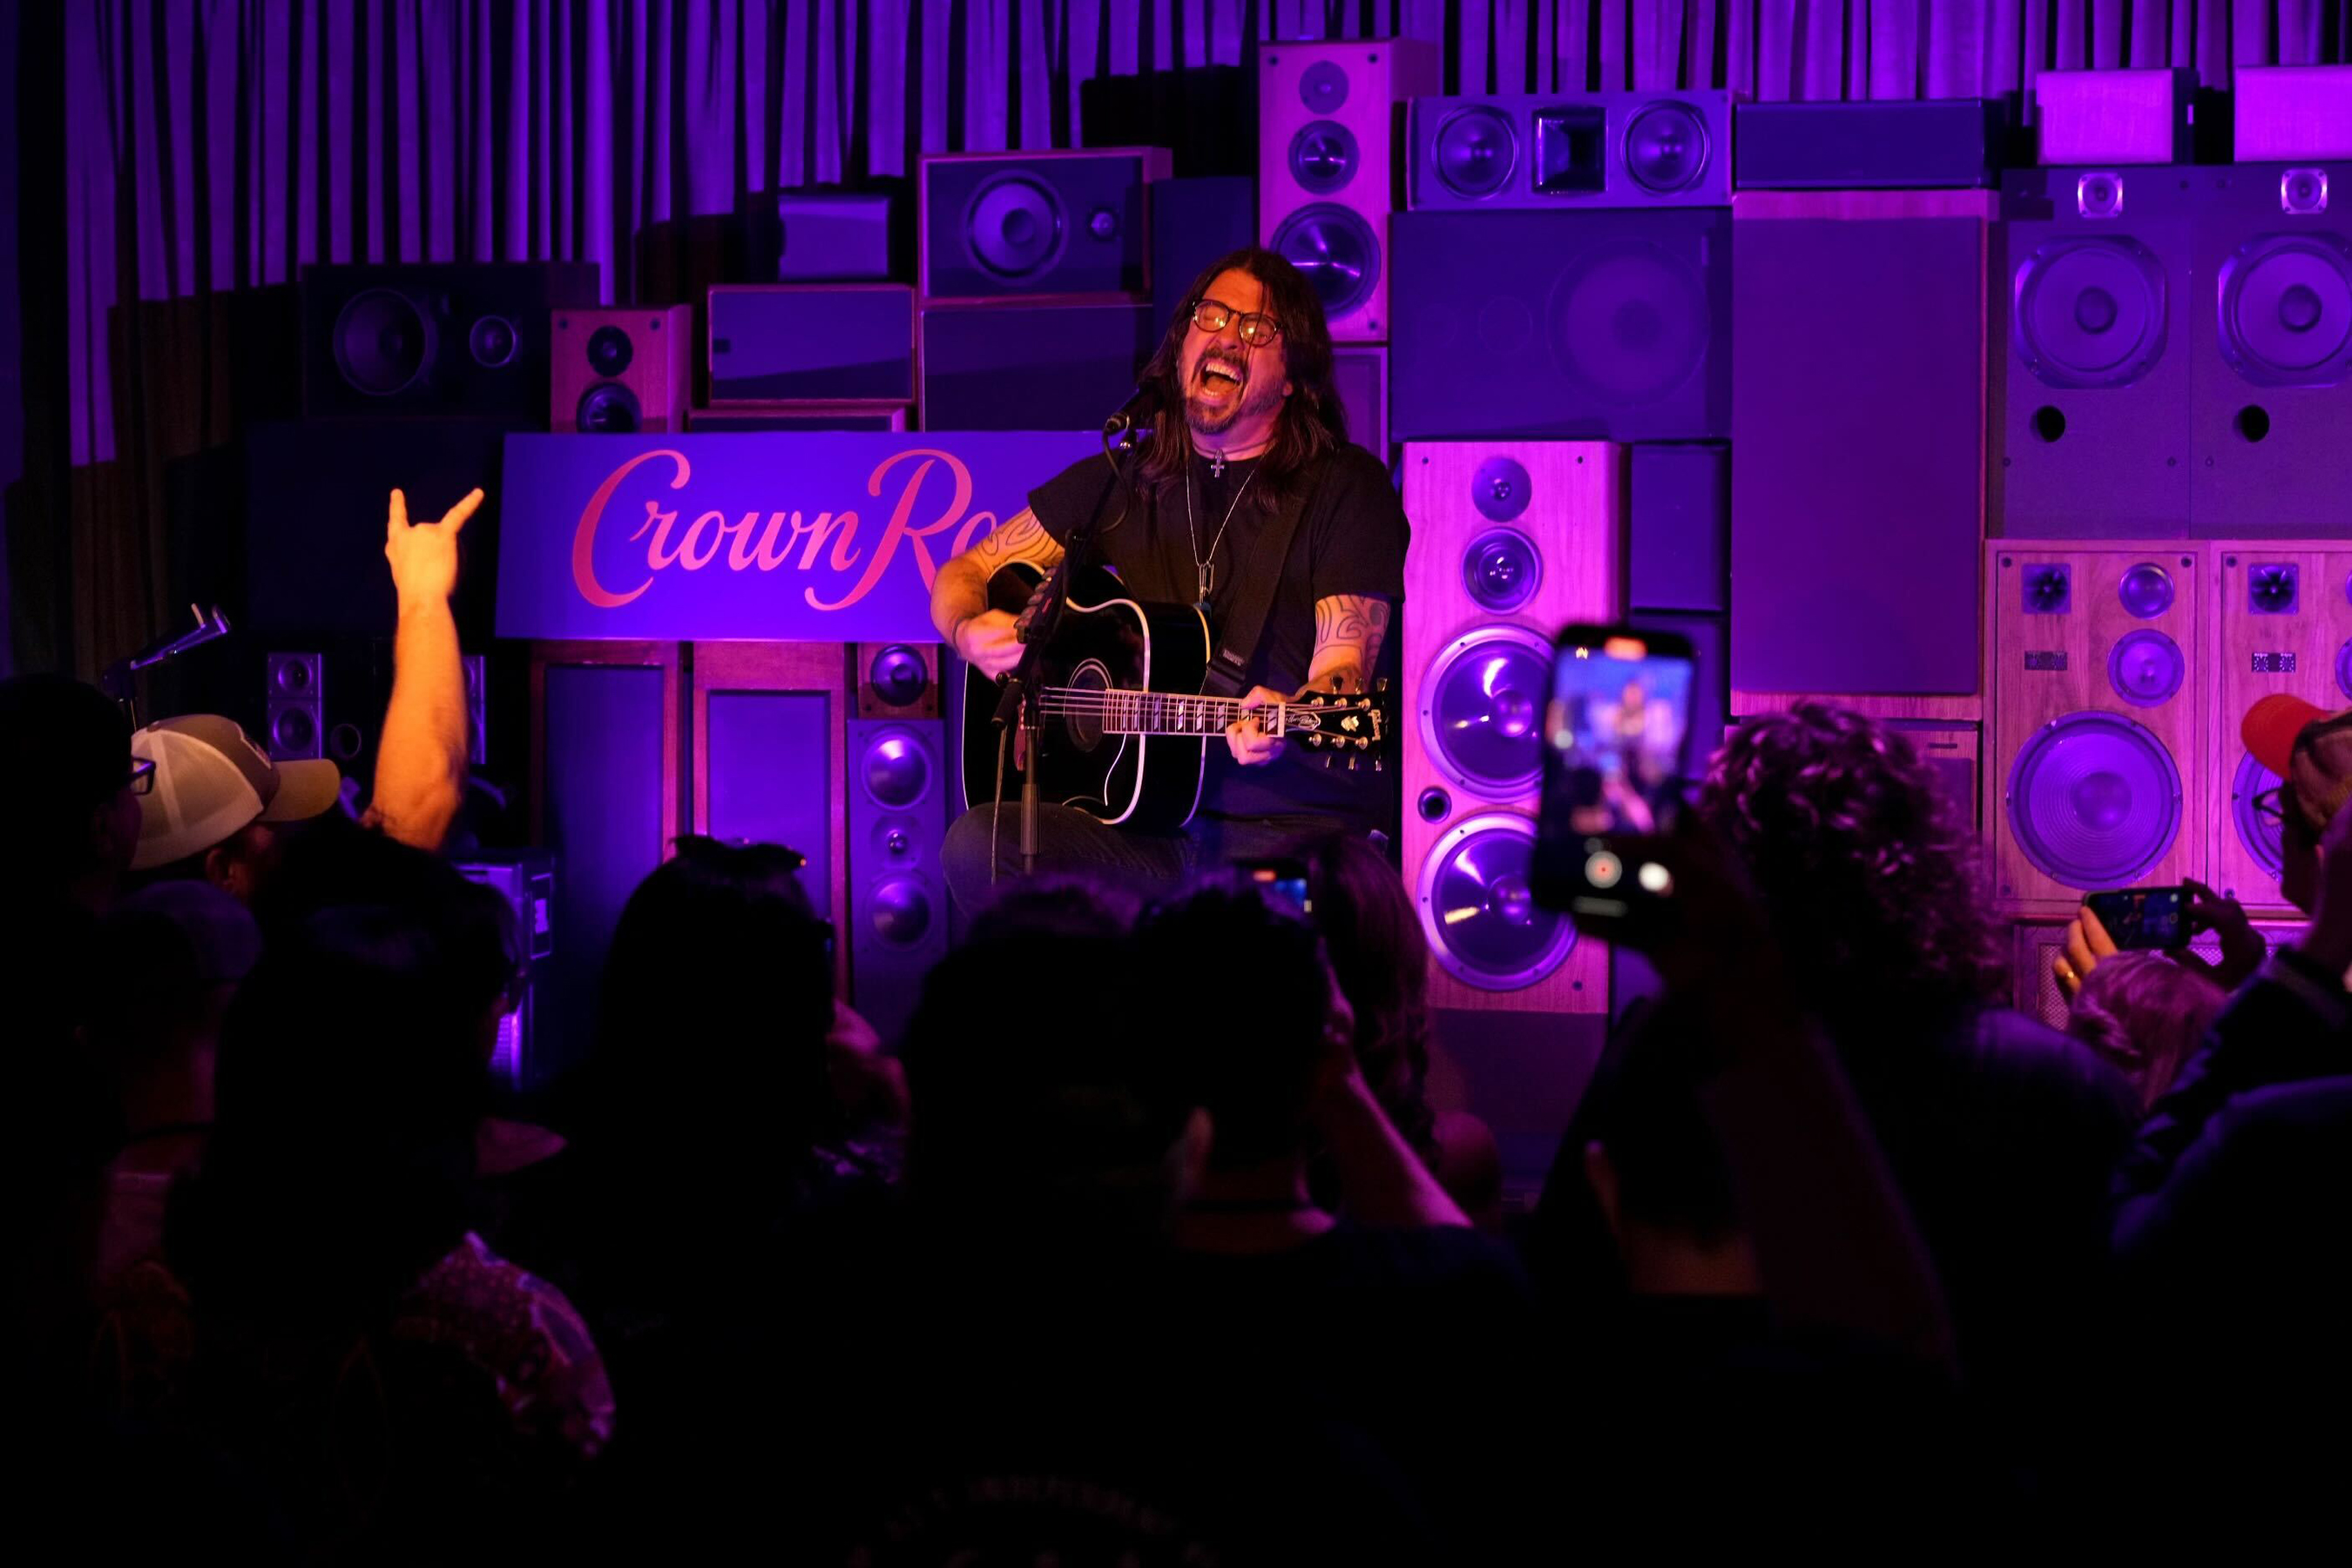 Dave Grohl kicked off Super Bowl weekend with an exclusive acoustic performance for veterans at Crown Royal's pre-game party experience in Phoenix, Arizona.